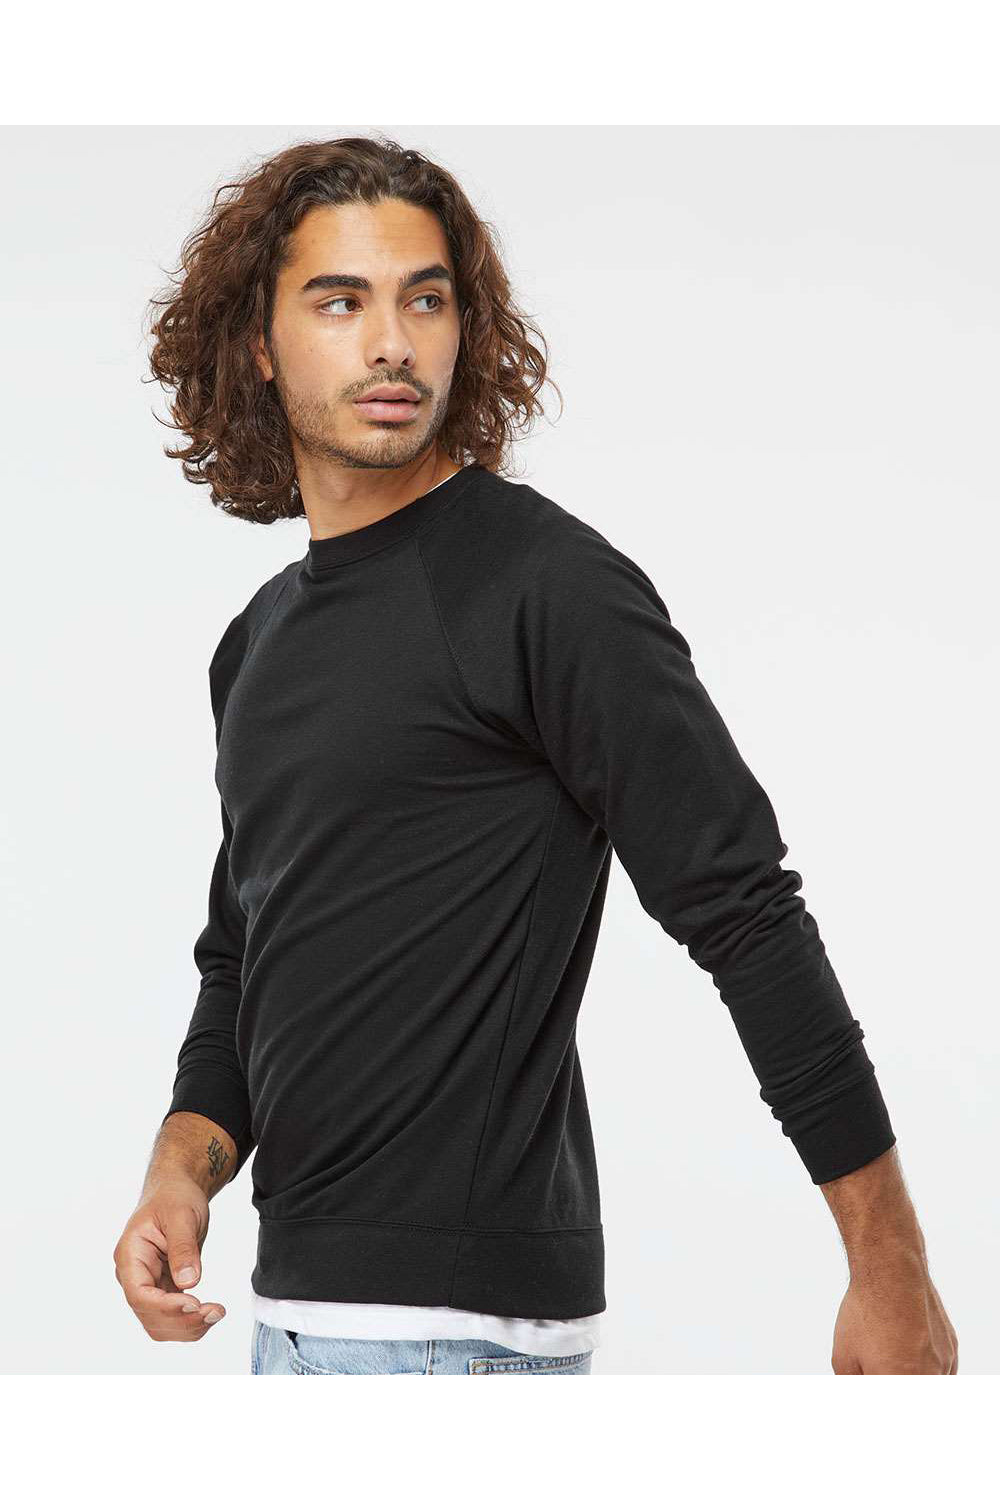 Independent Trading Co. SS1000C Mens Icon Loopback Terry Crewneck Sweatshirt Black Model Side